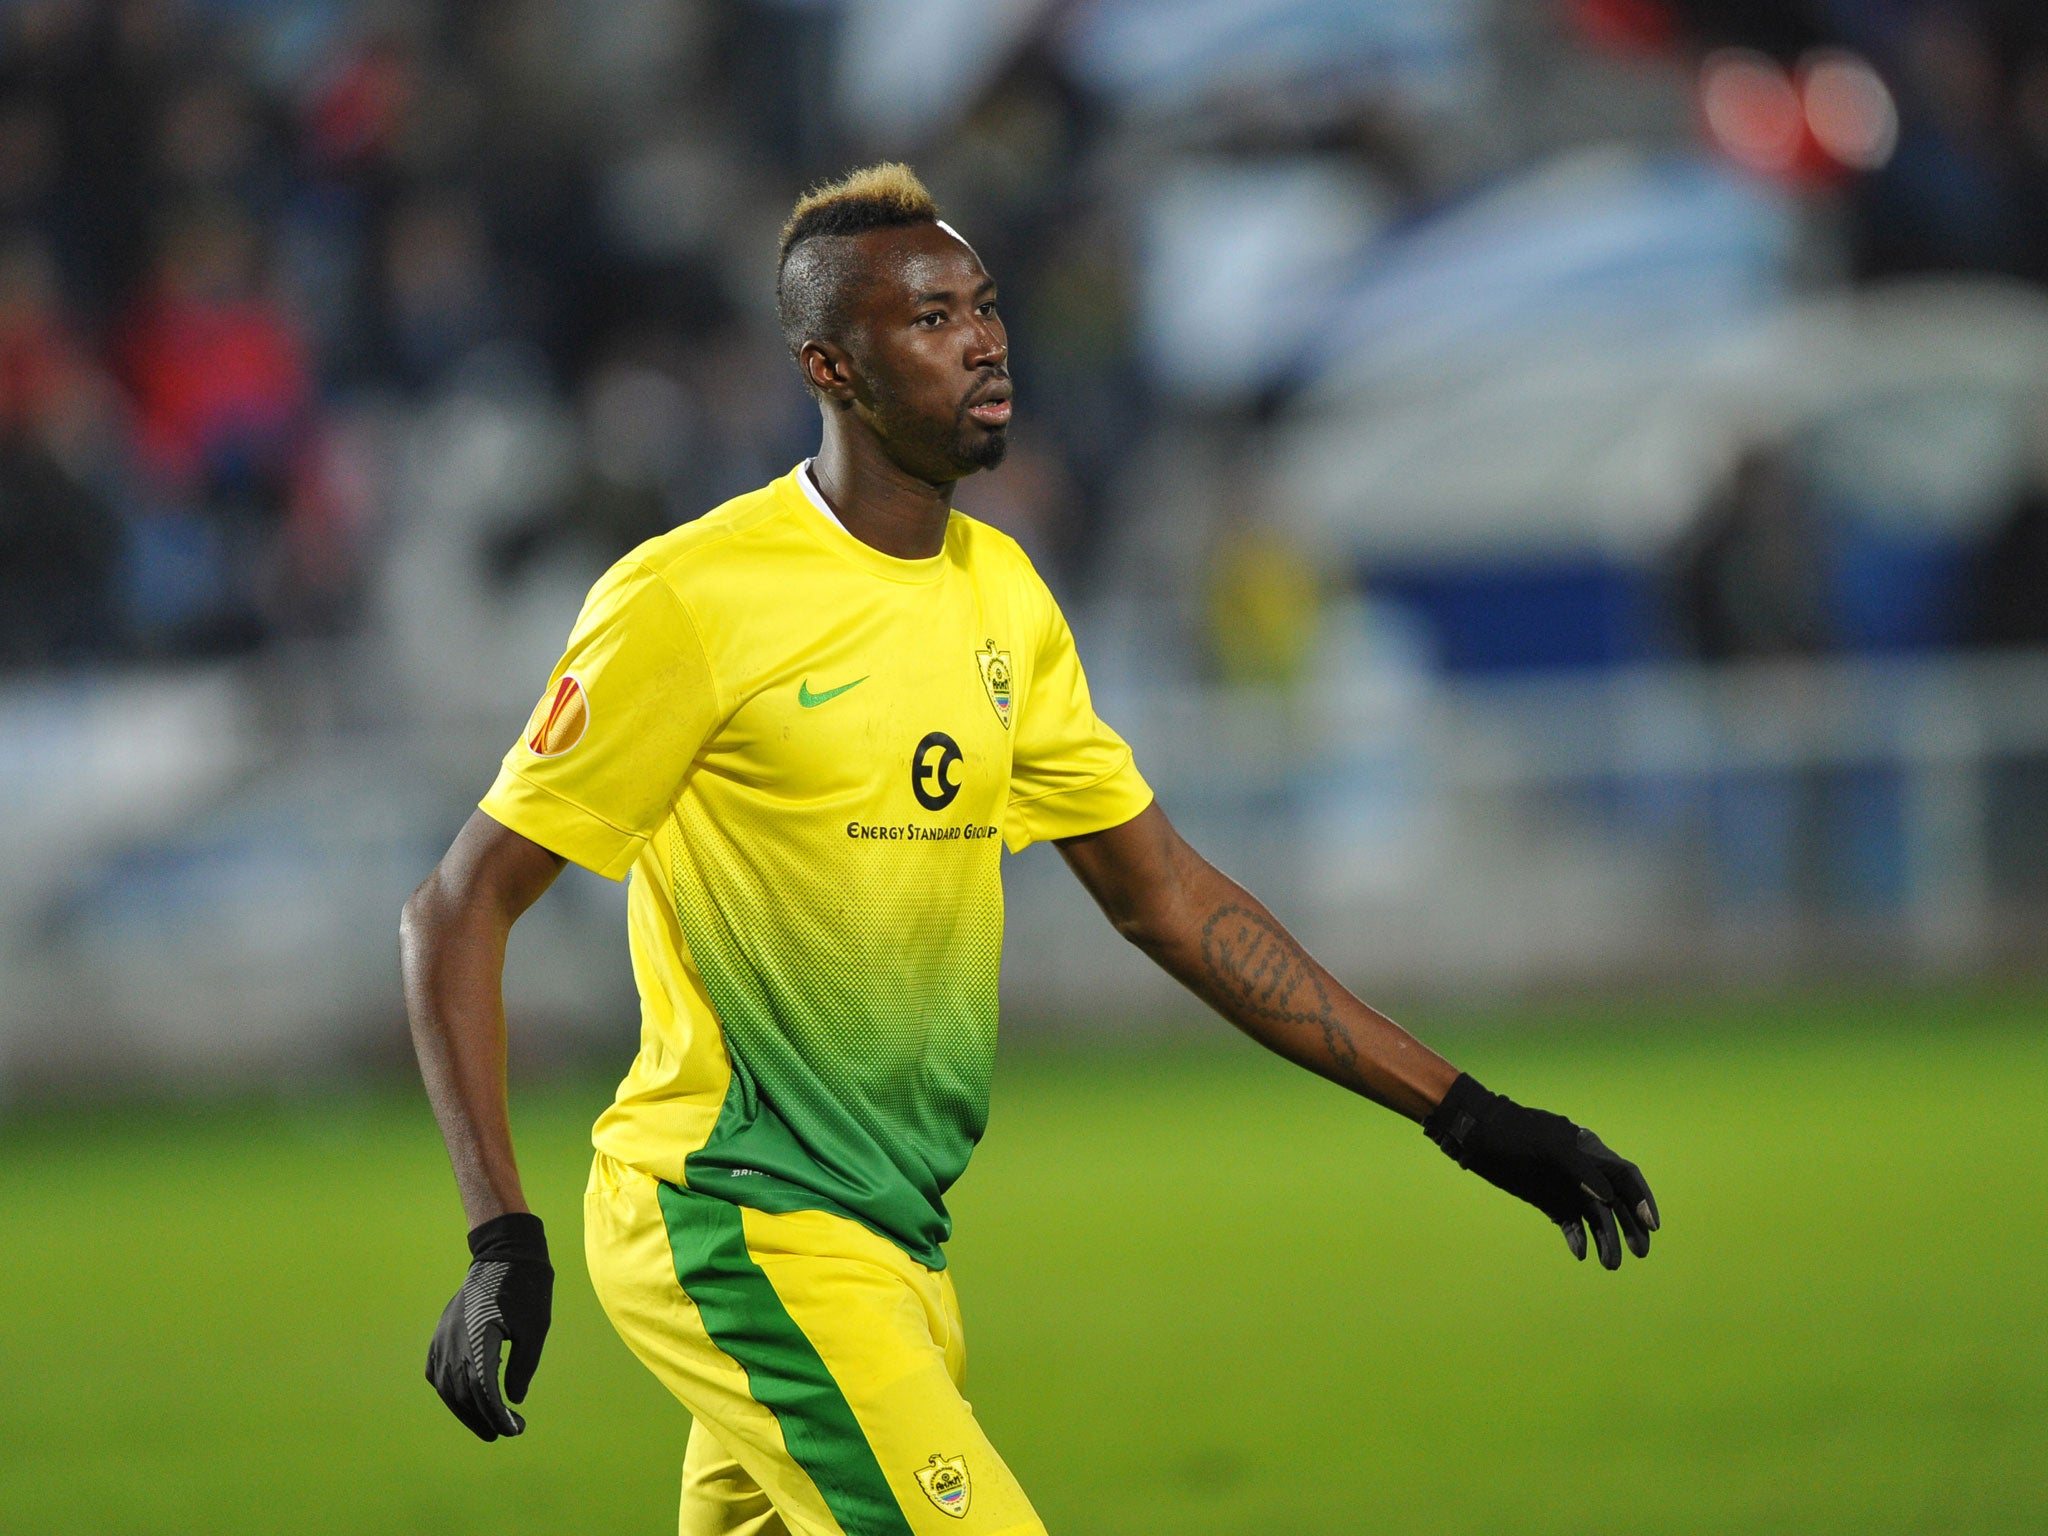 Lacina Traore looks set to complete a move to Everton, subject to a work permit